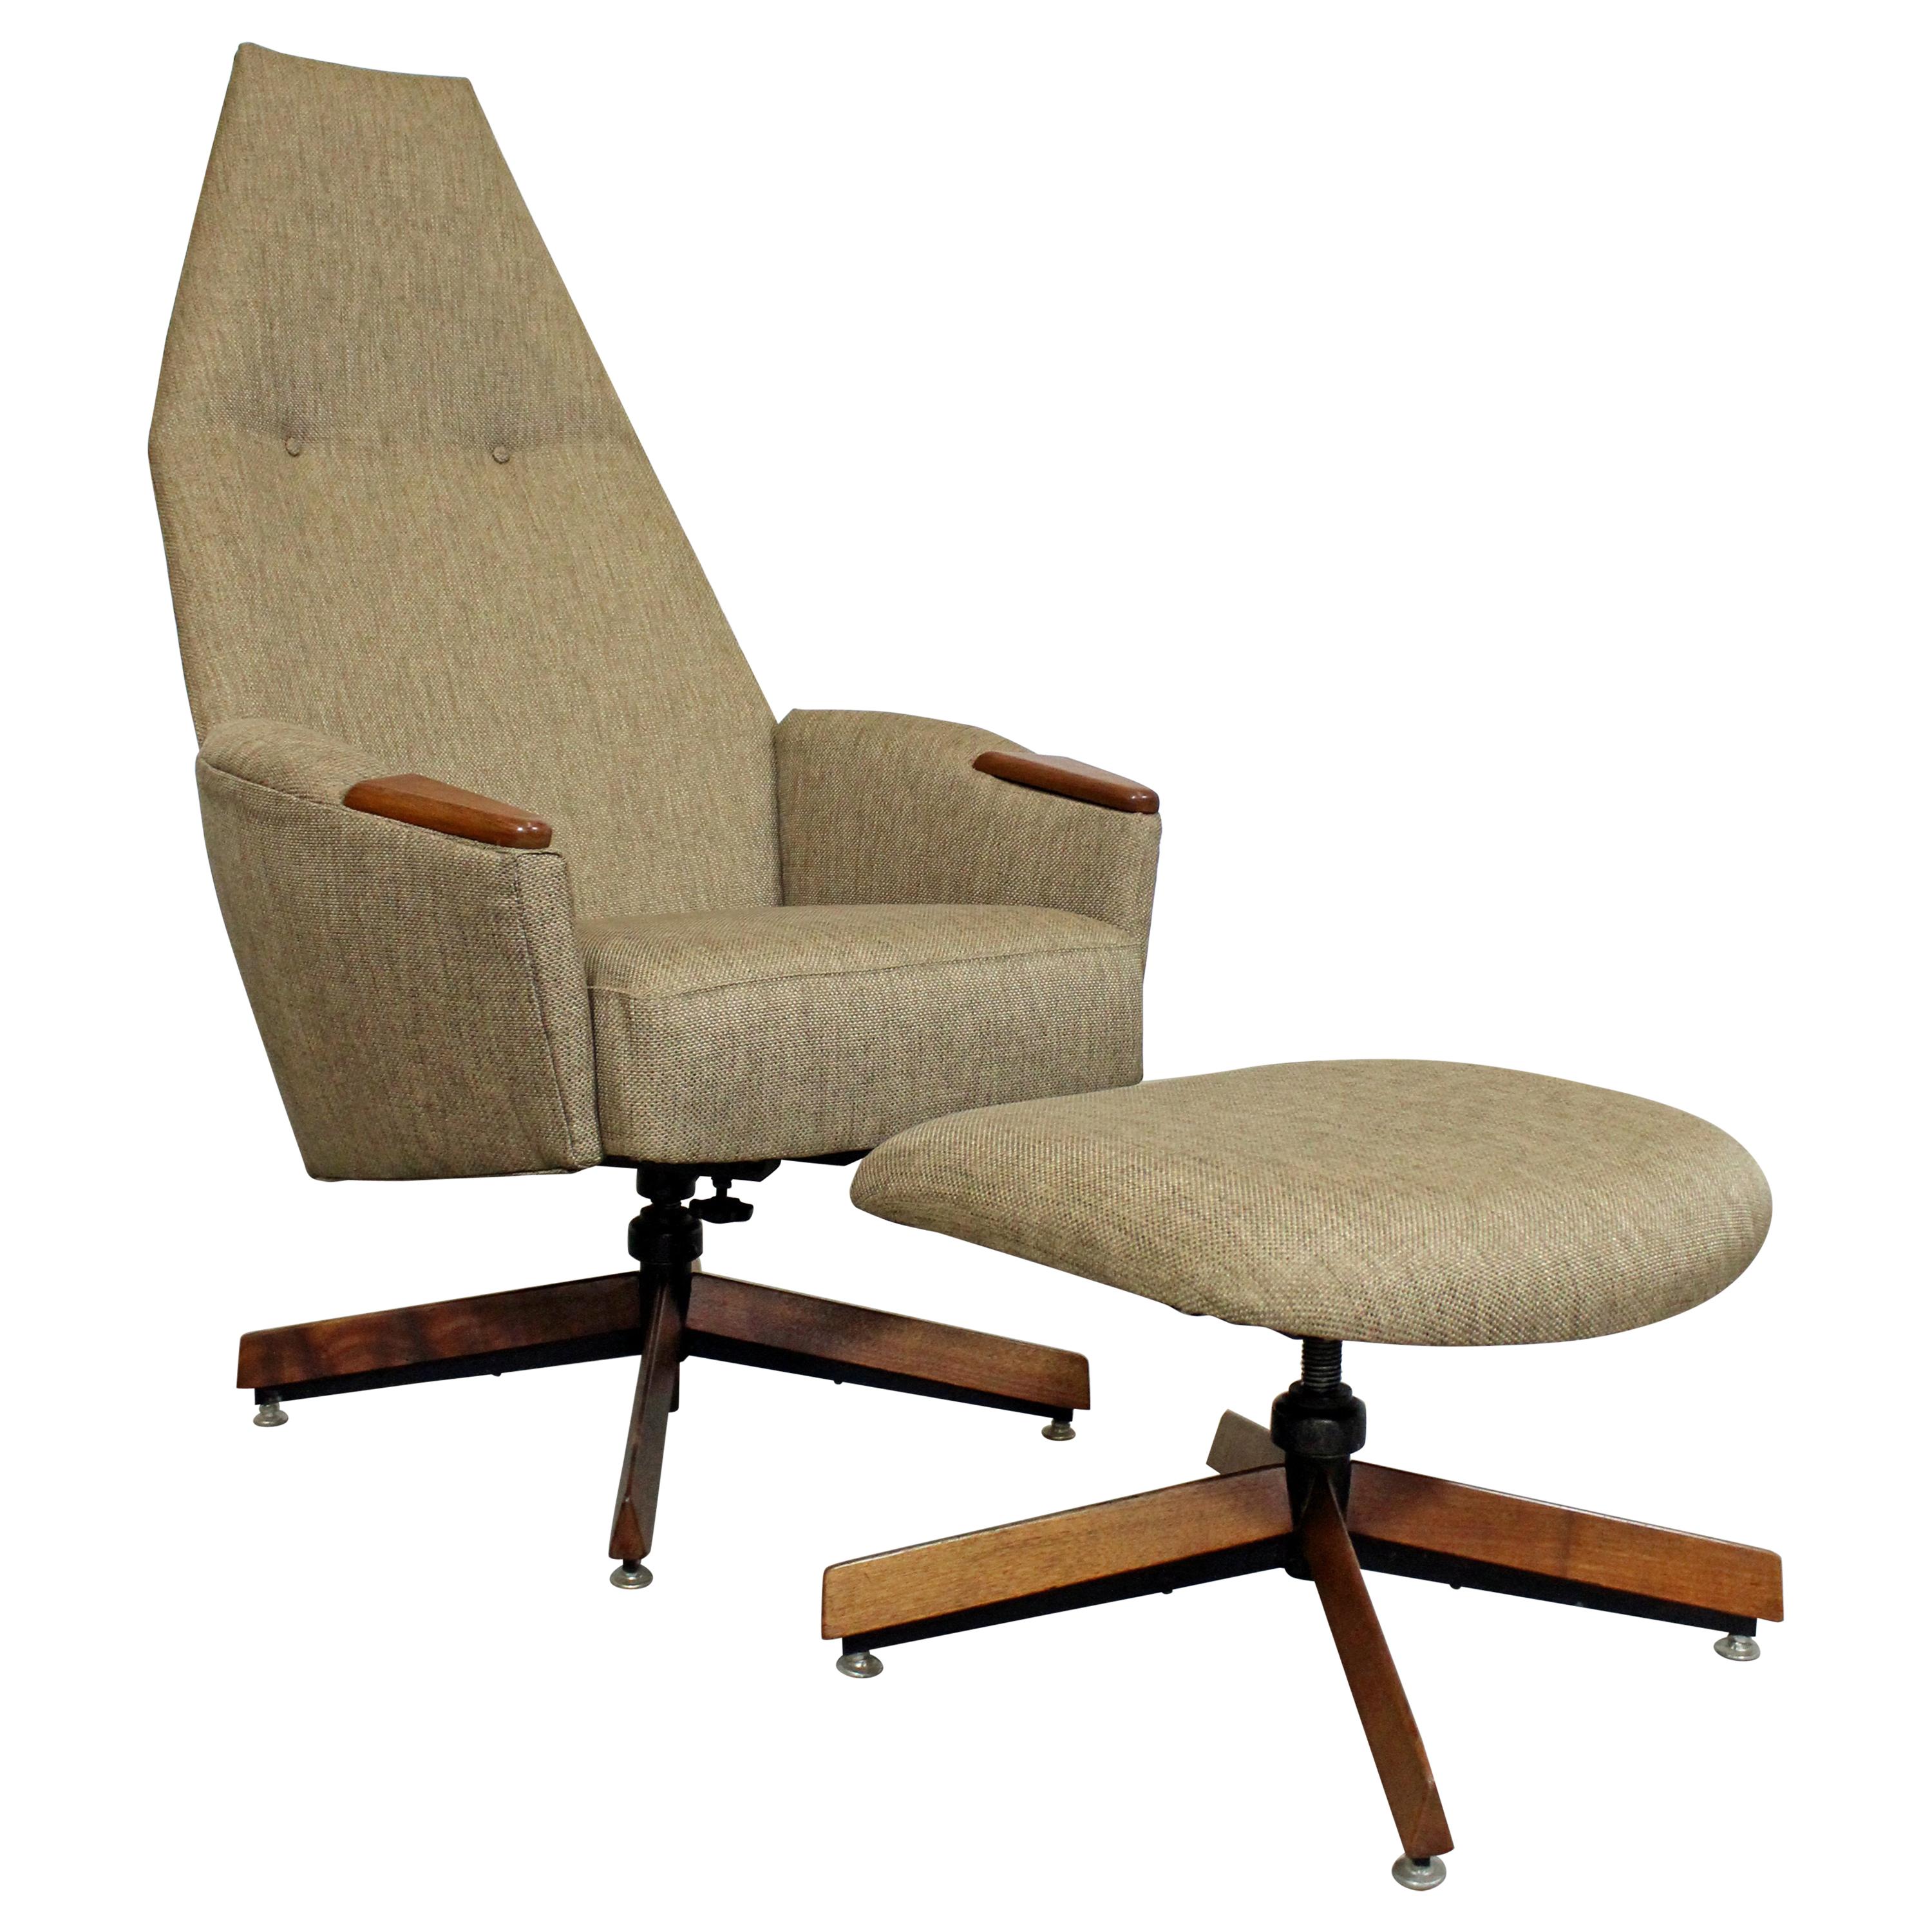 Mid-Century Modern Adrian Pearsall for Craft Assoc. Lounge Chair and Ottoman